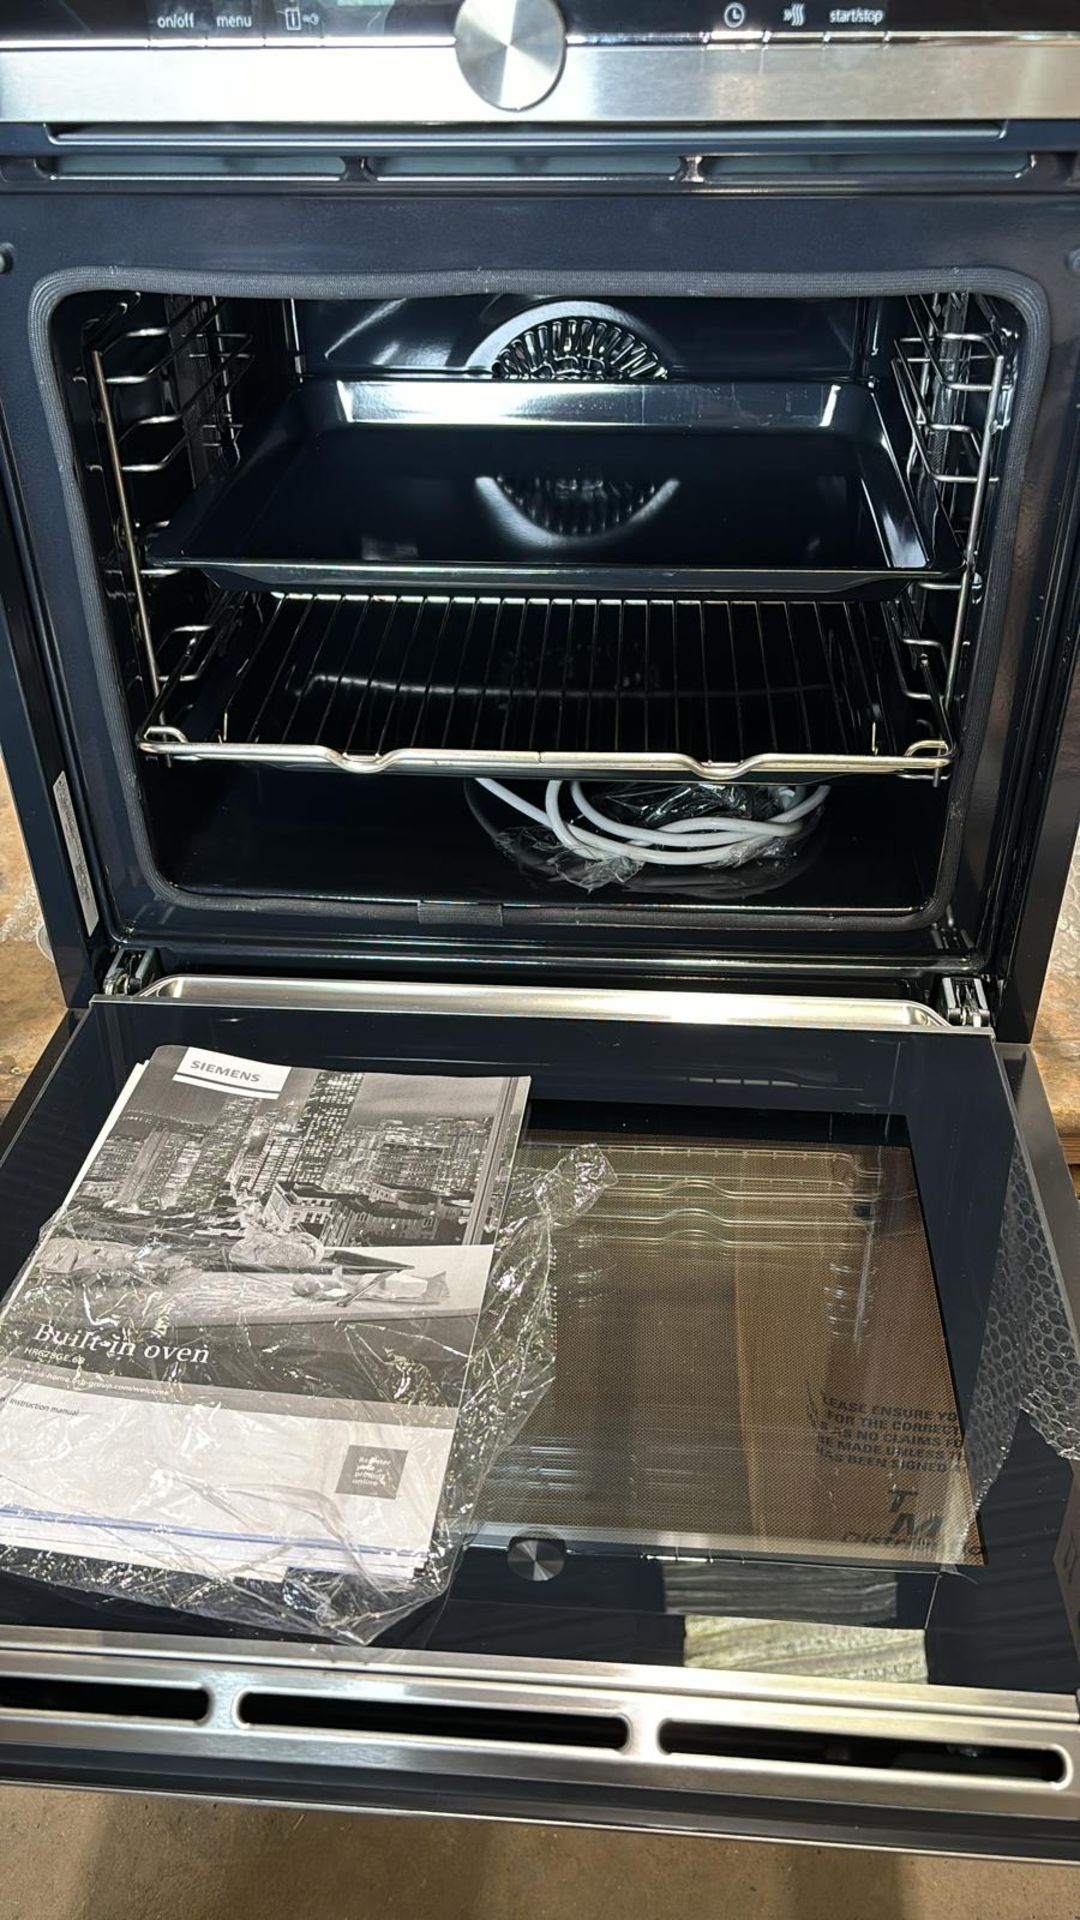 Ex-Display Brand New Boxed Siemens HR678GES6B Single Oven RRP £1573 - Image 3 of 3